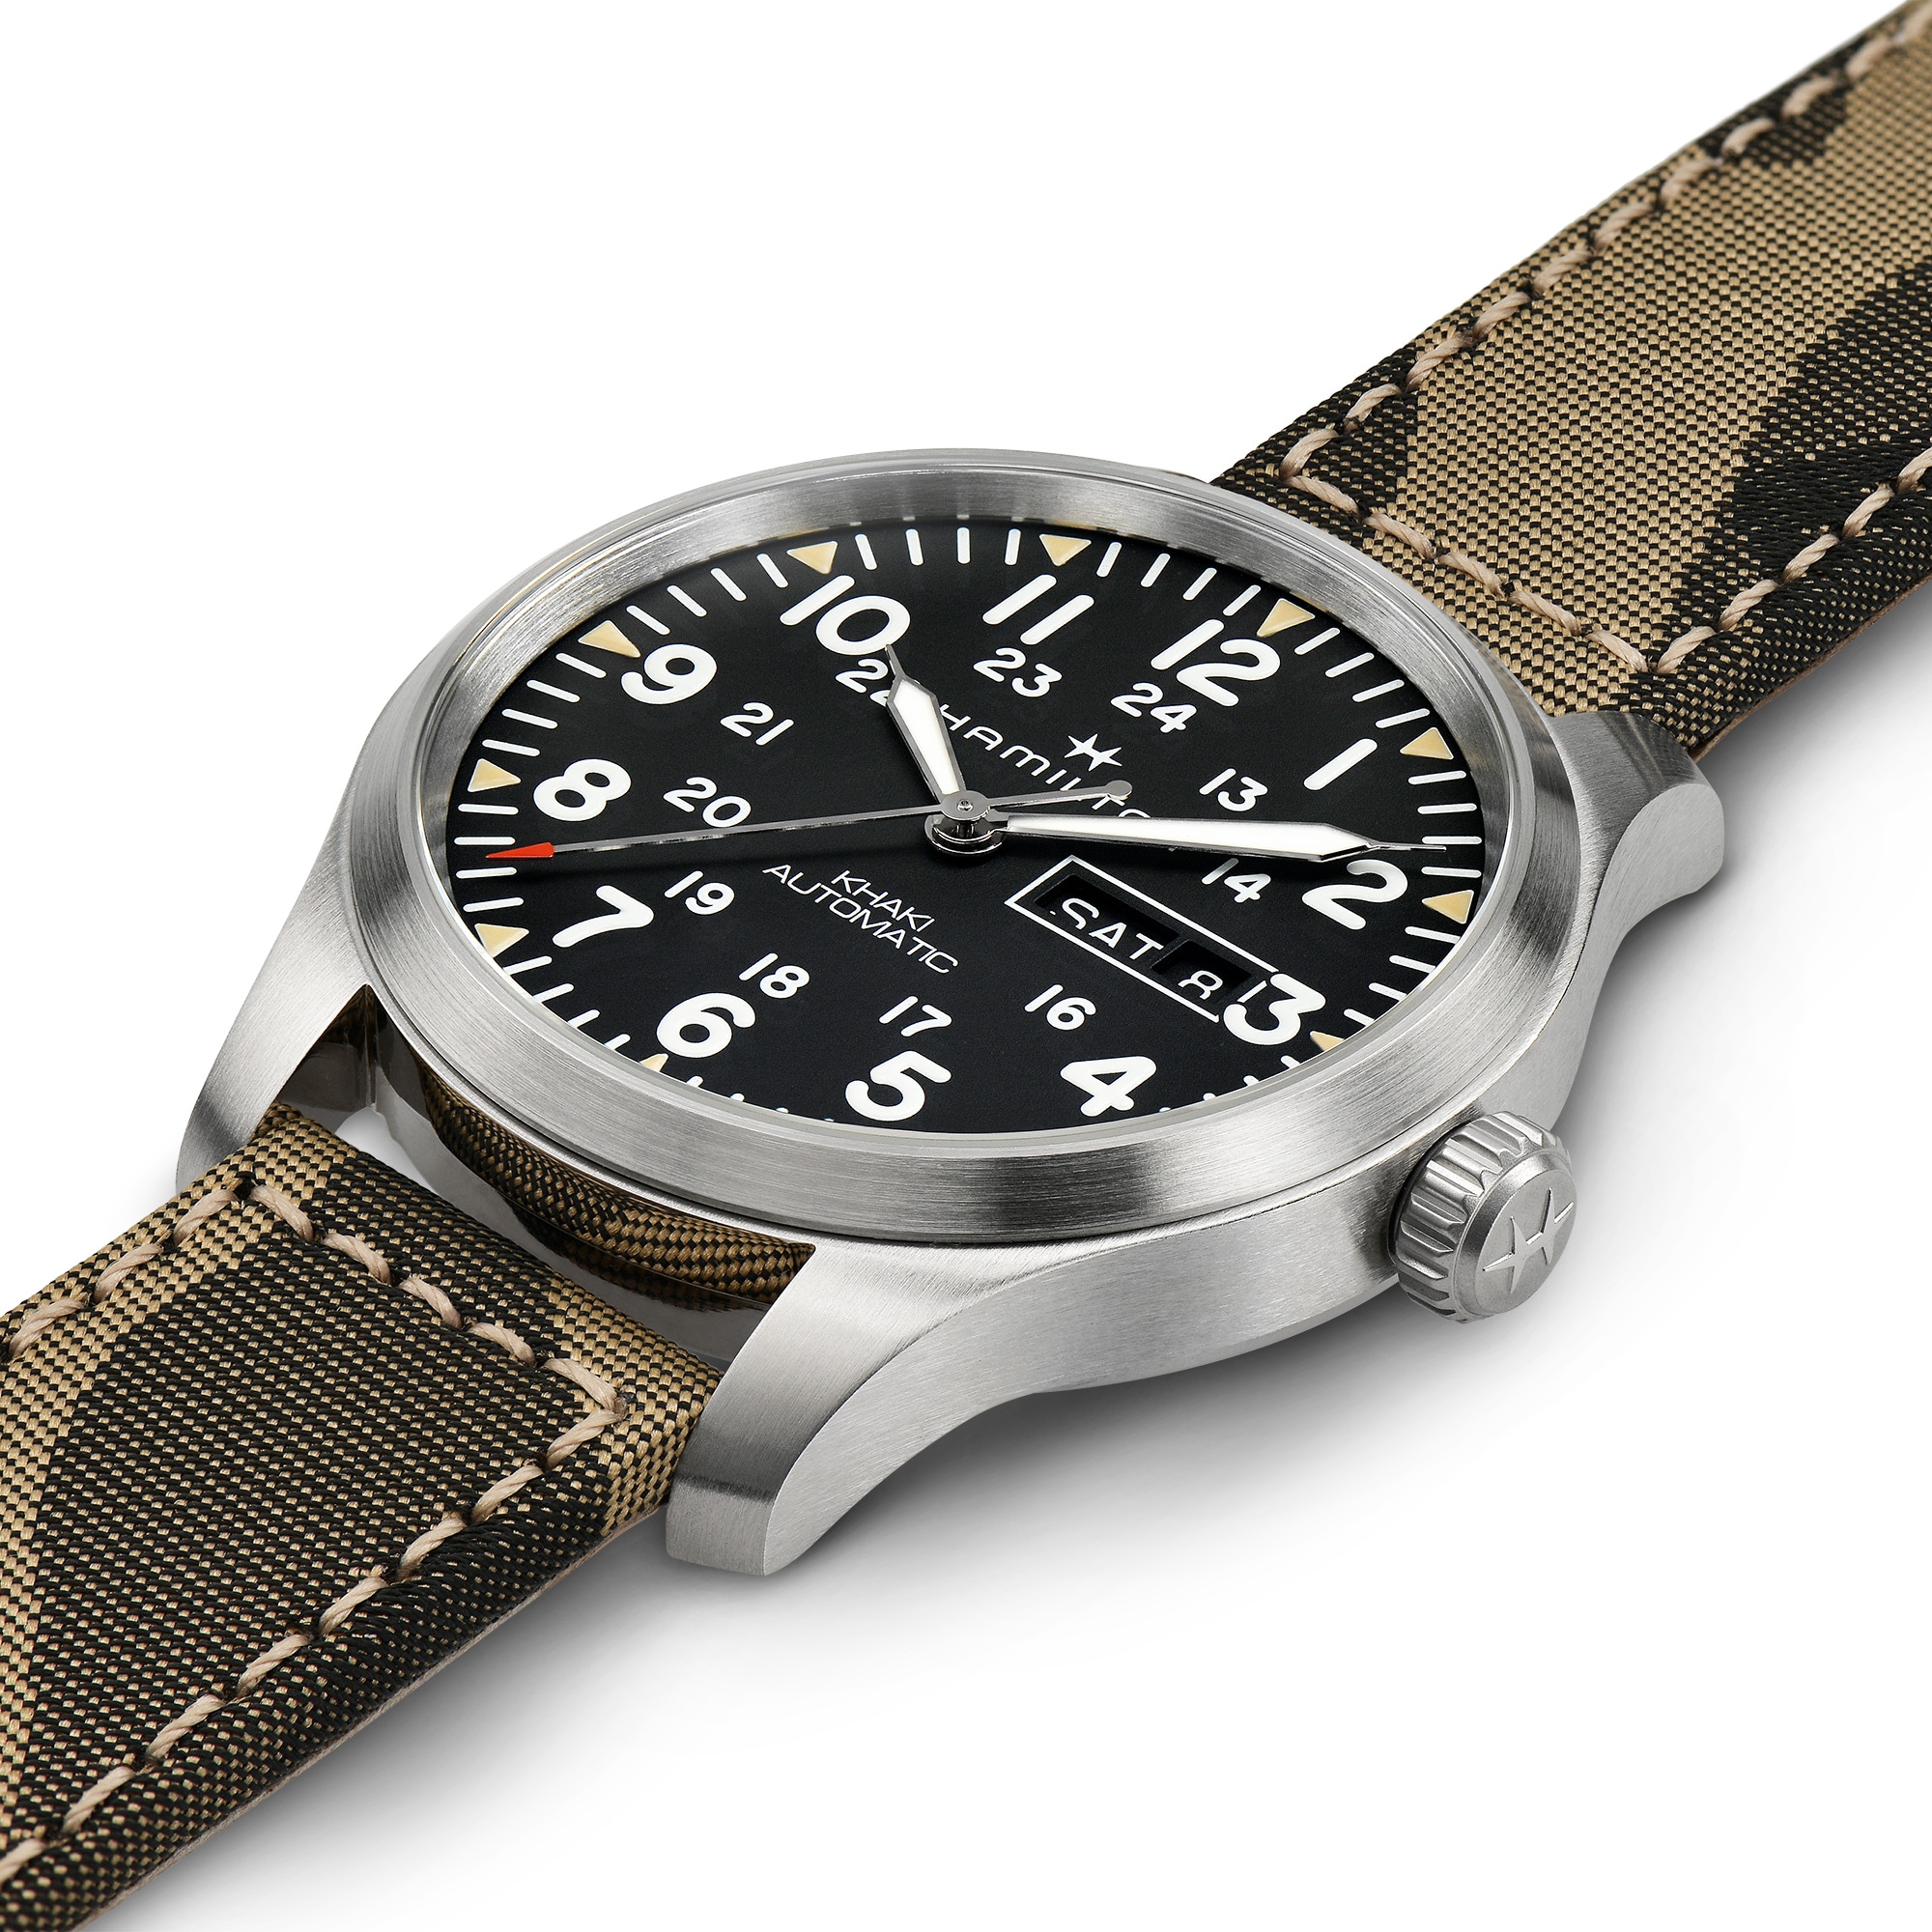 Khaki Field Automatic Watch Day Date - Black Dial - H70535031